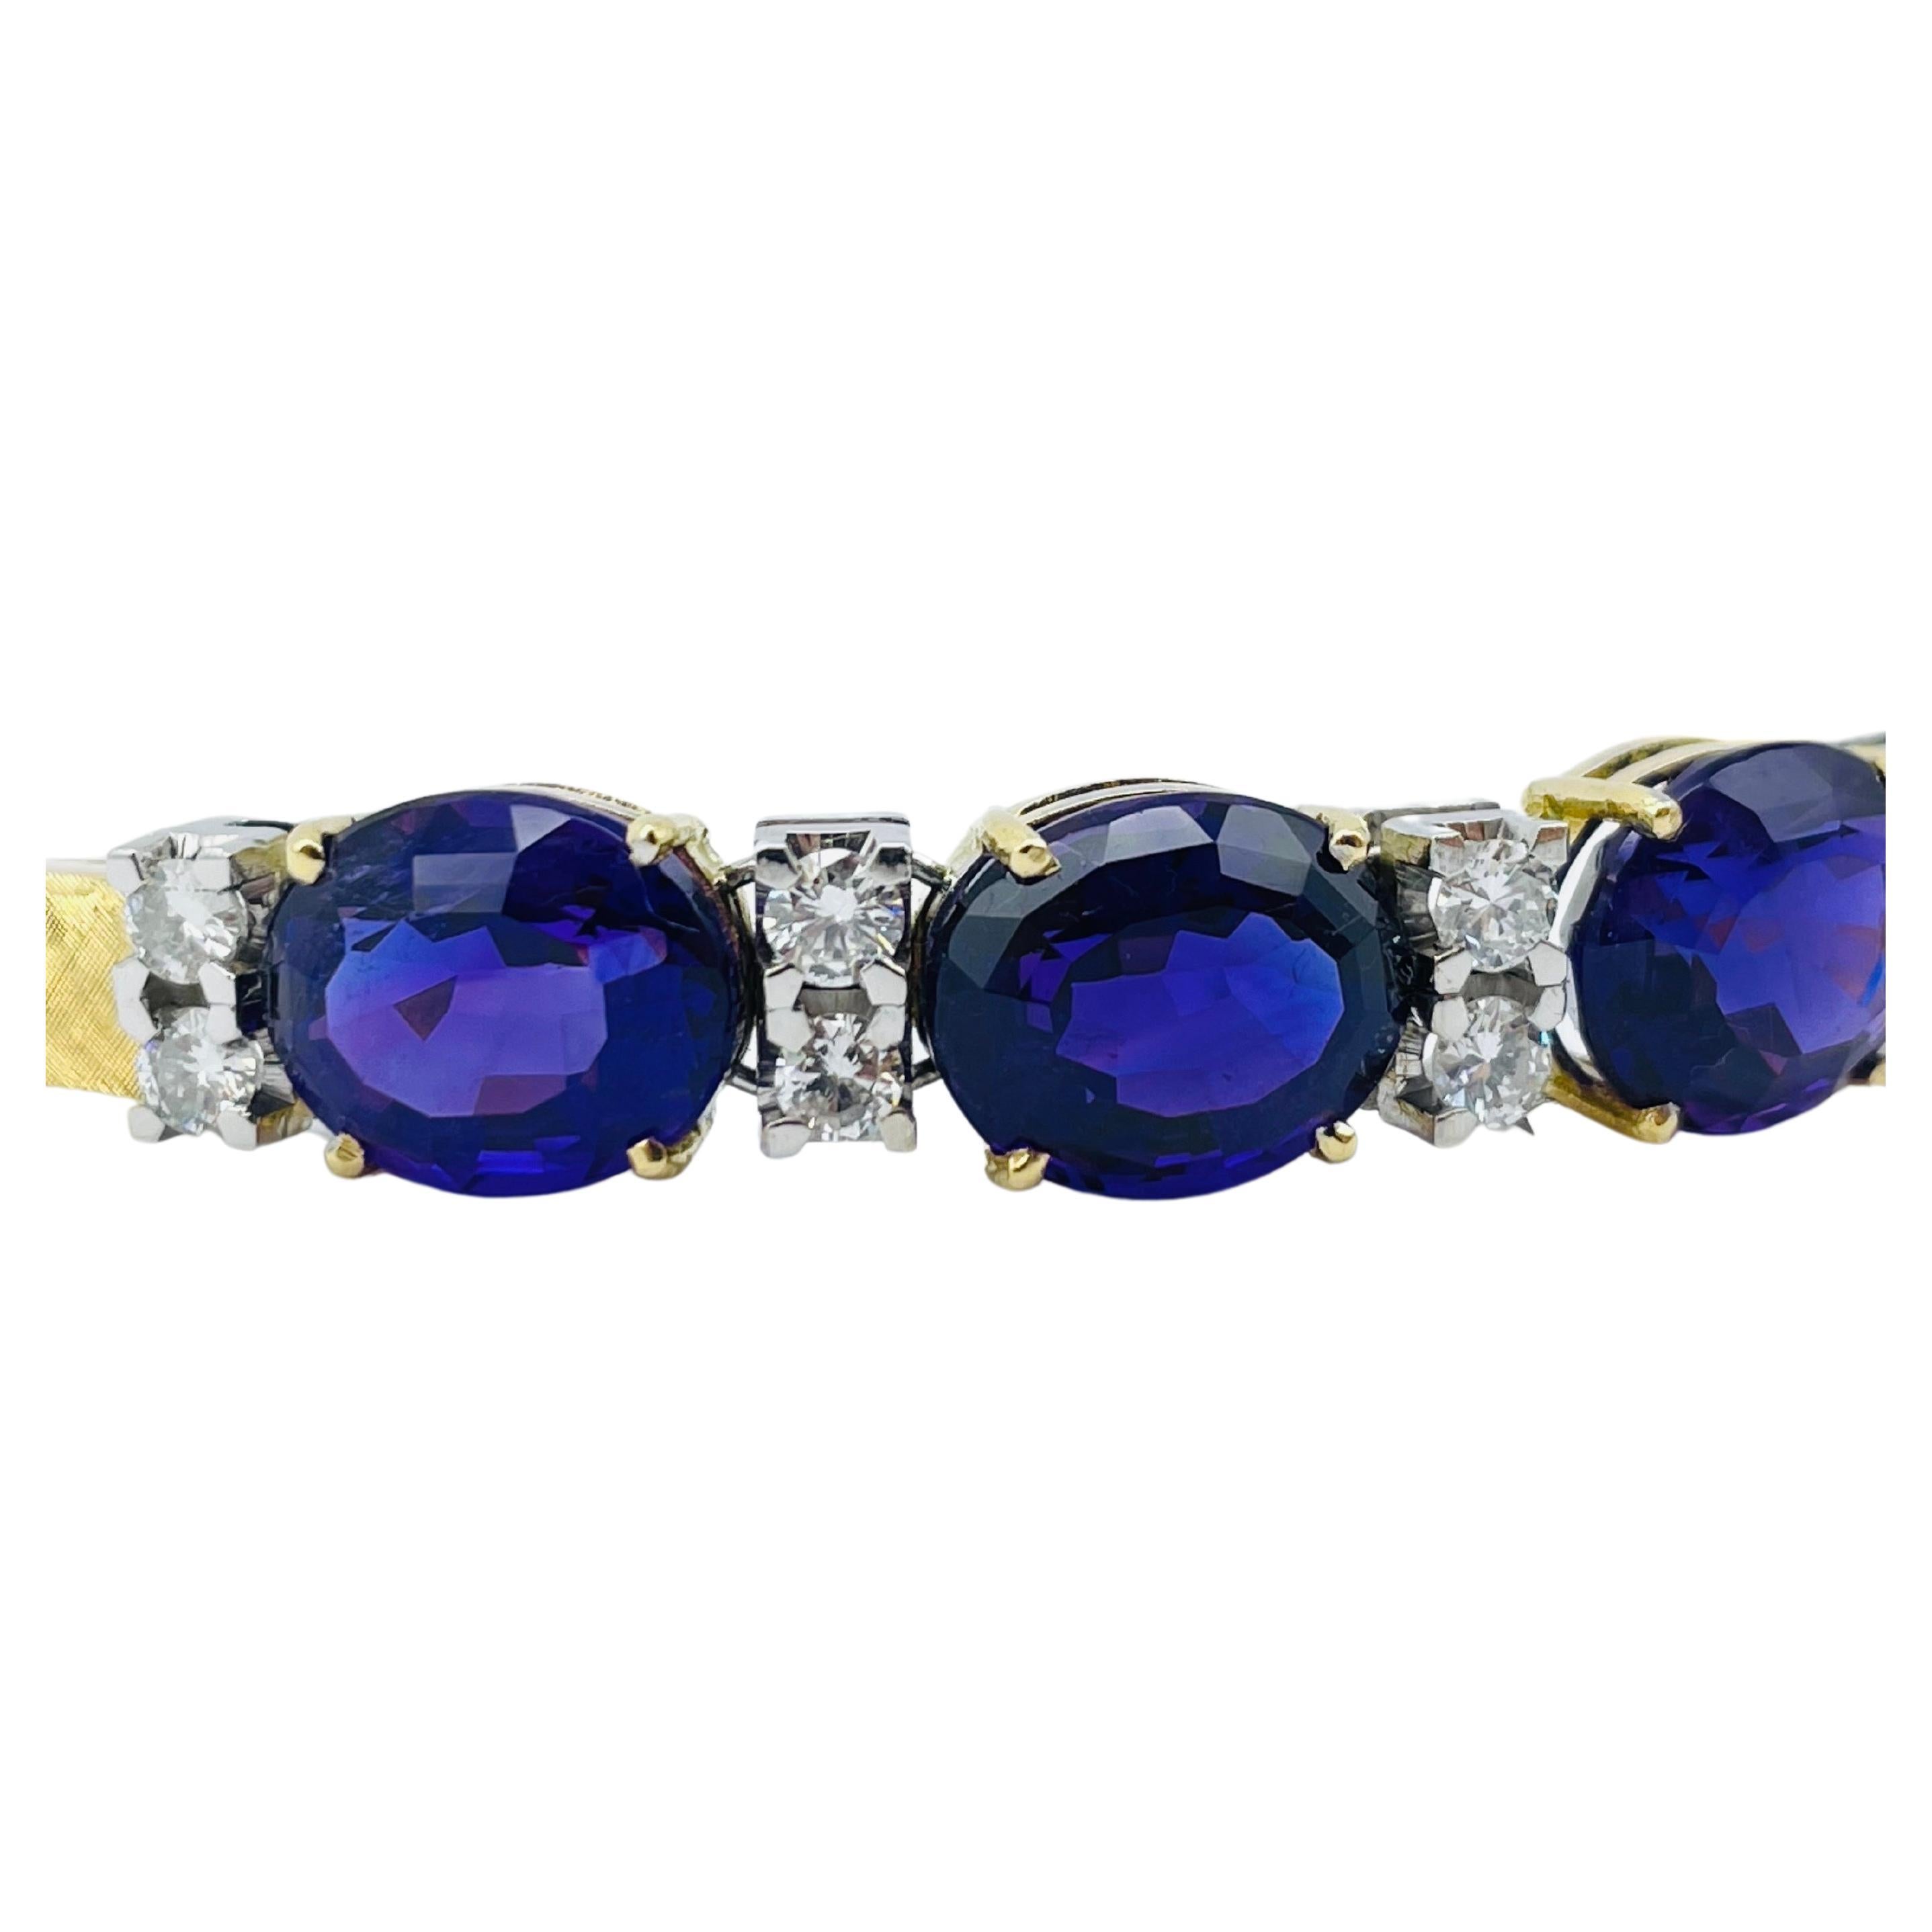 Noble Amethyst and Diamond Bracelet, 18k Yellow Gold and White Gold For Sale 4